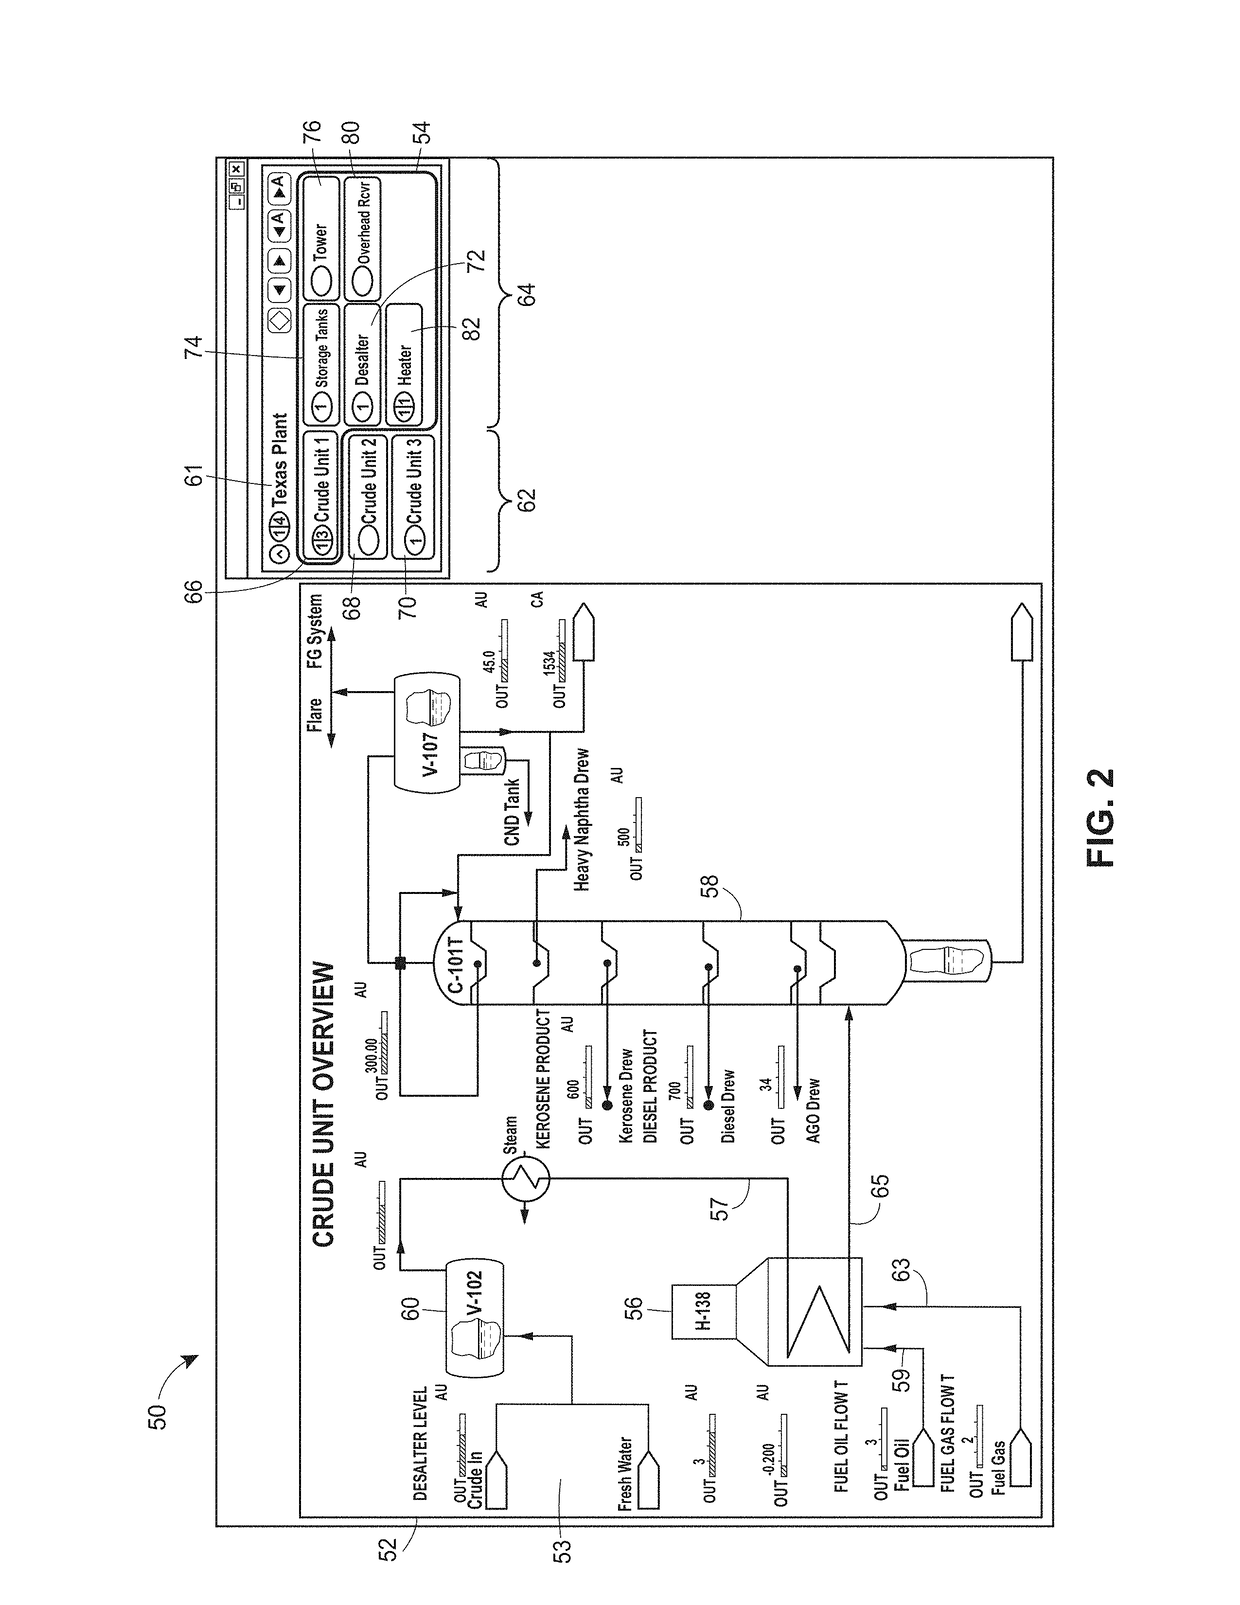 Graphical process variable trend monitoring for a process control system